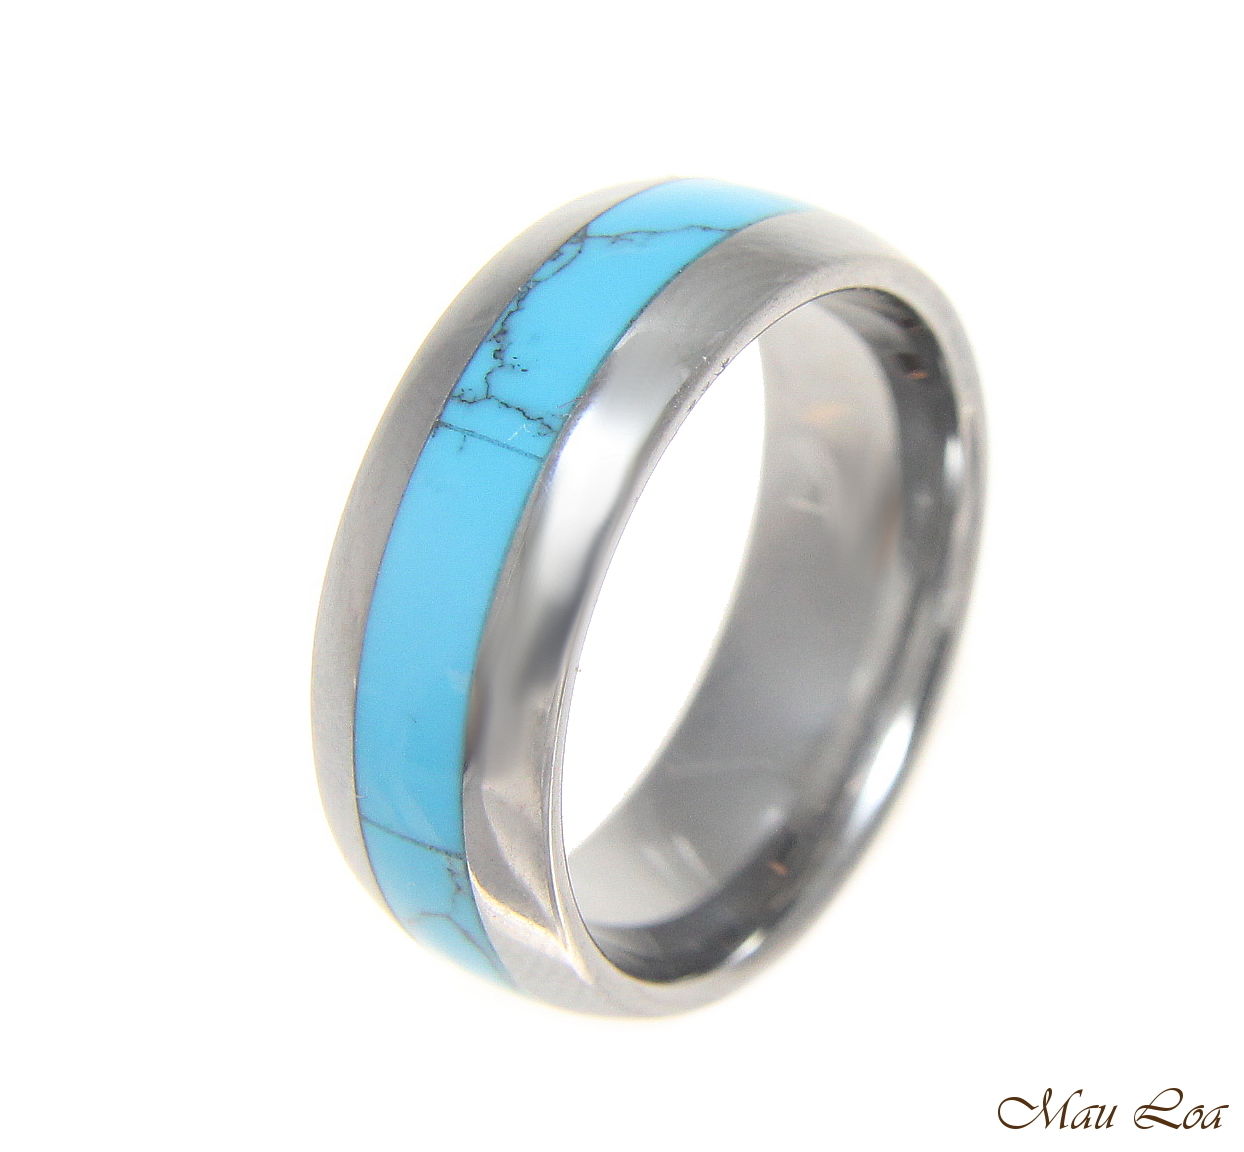 Tungsten 8mm Wedding Band Ring Unisex Blue Turquoise Inlay Comfort Fit Size 5-14